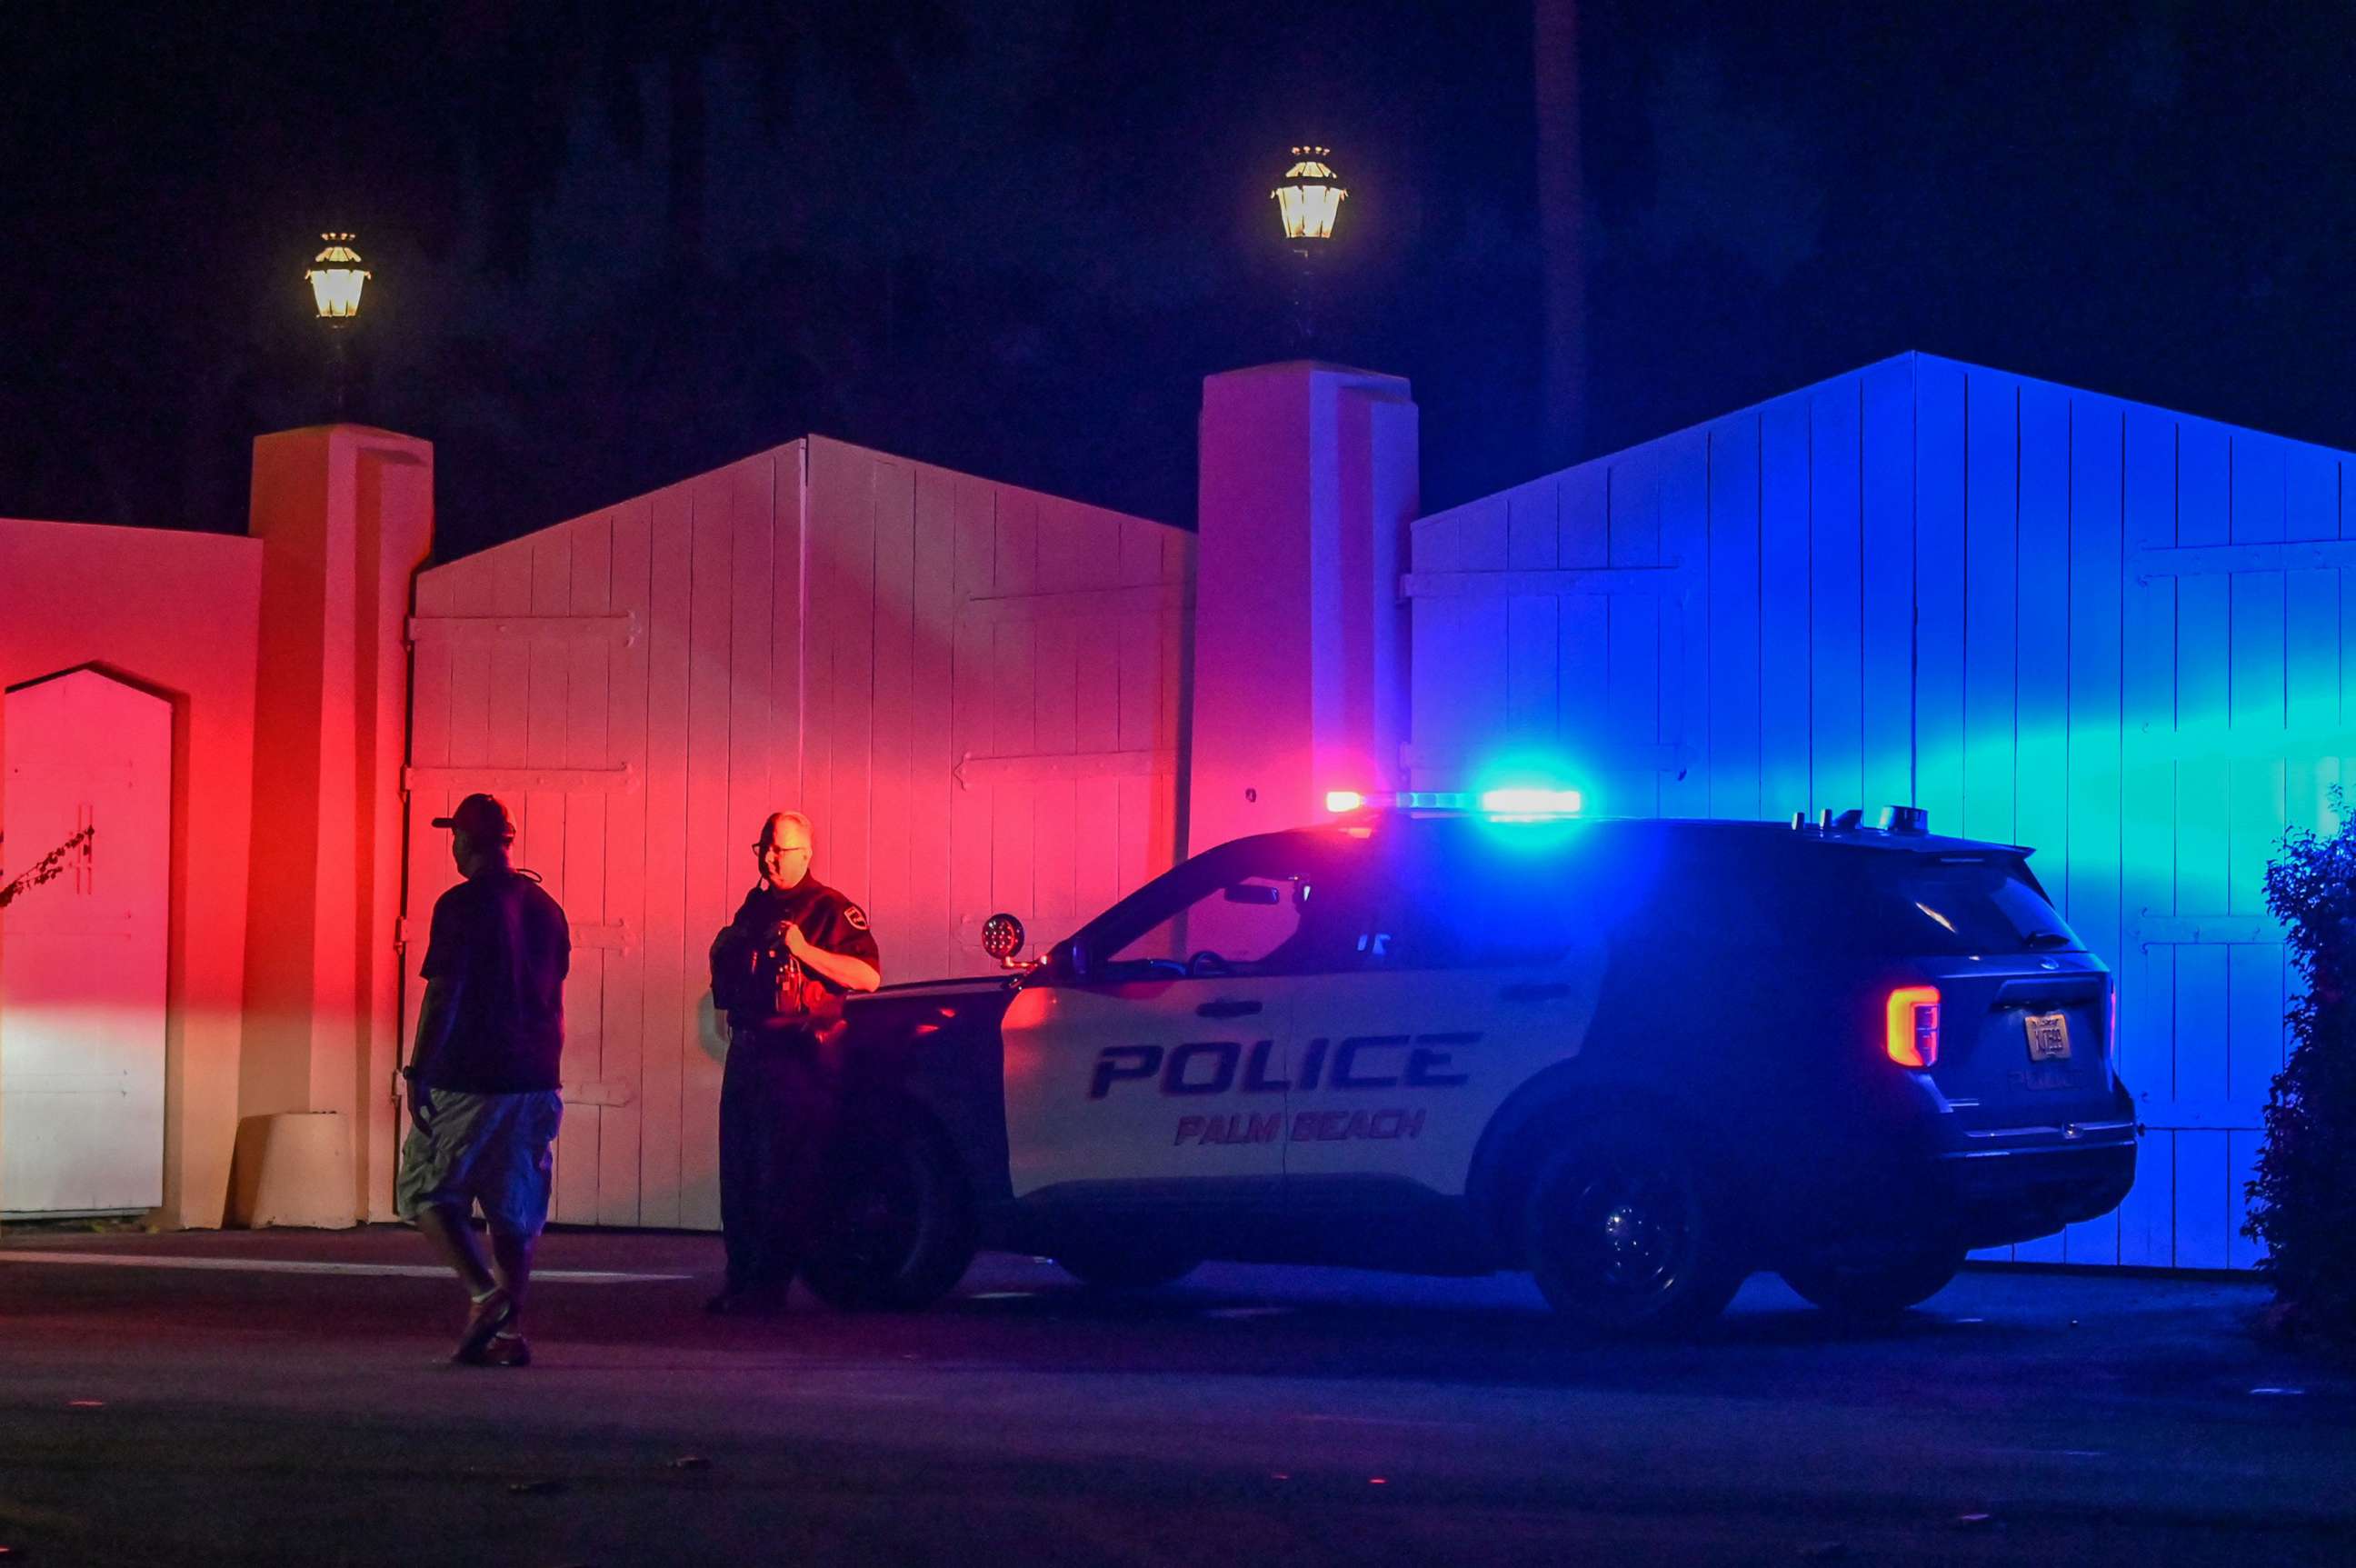 PHOTO: A police car is seen outside former US President Donald Trump's residence in Mar-A-Lago, Fla. on Aug. 8, 2022.